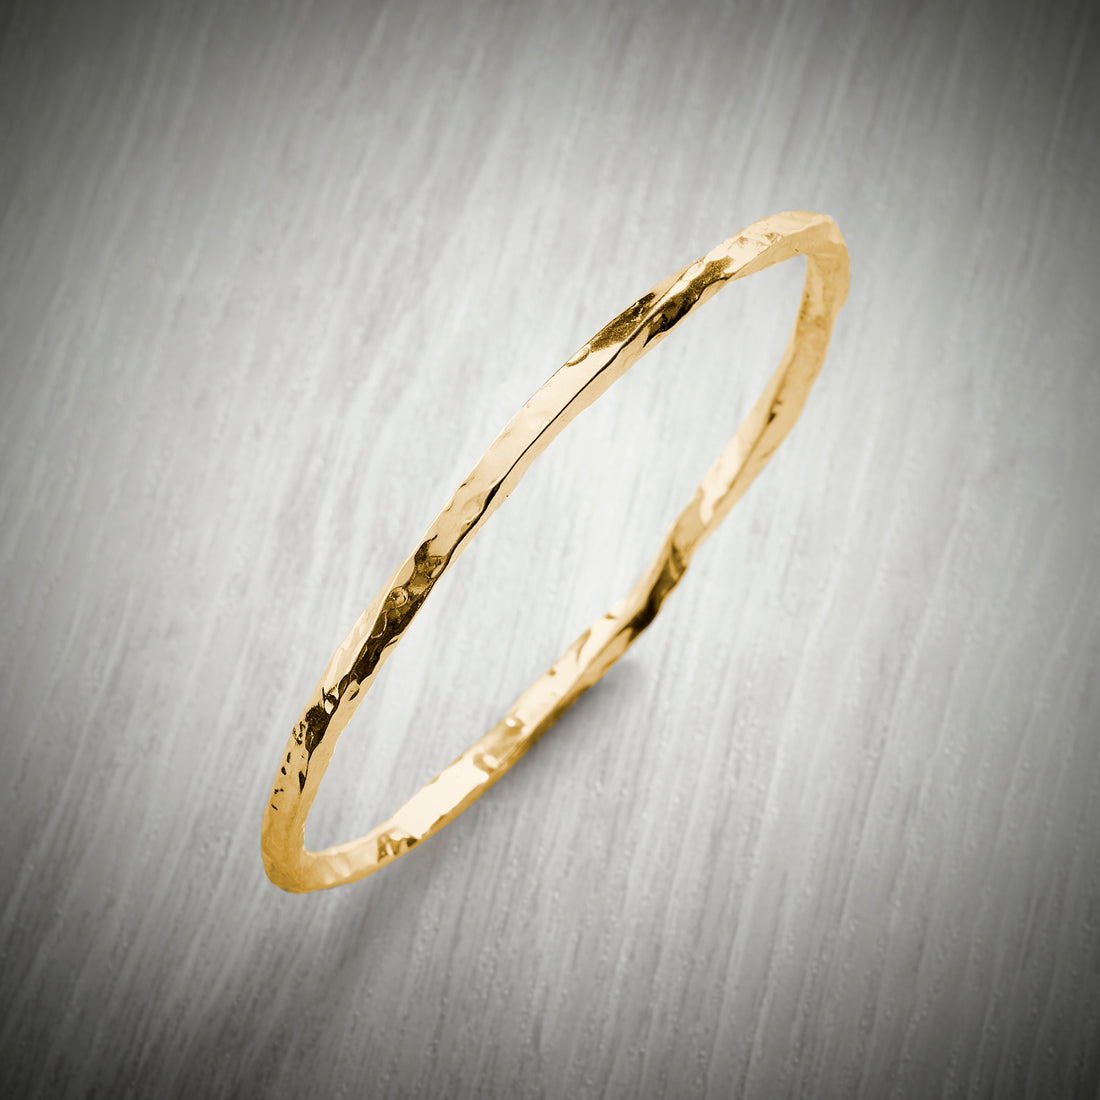 Tanishq 22KT Yellow Gold Bracelet at Rs 181327/piece | New Items in Noida |  ID: 20723934491